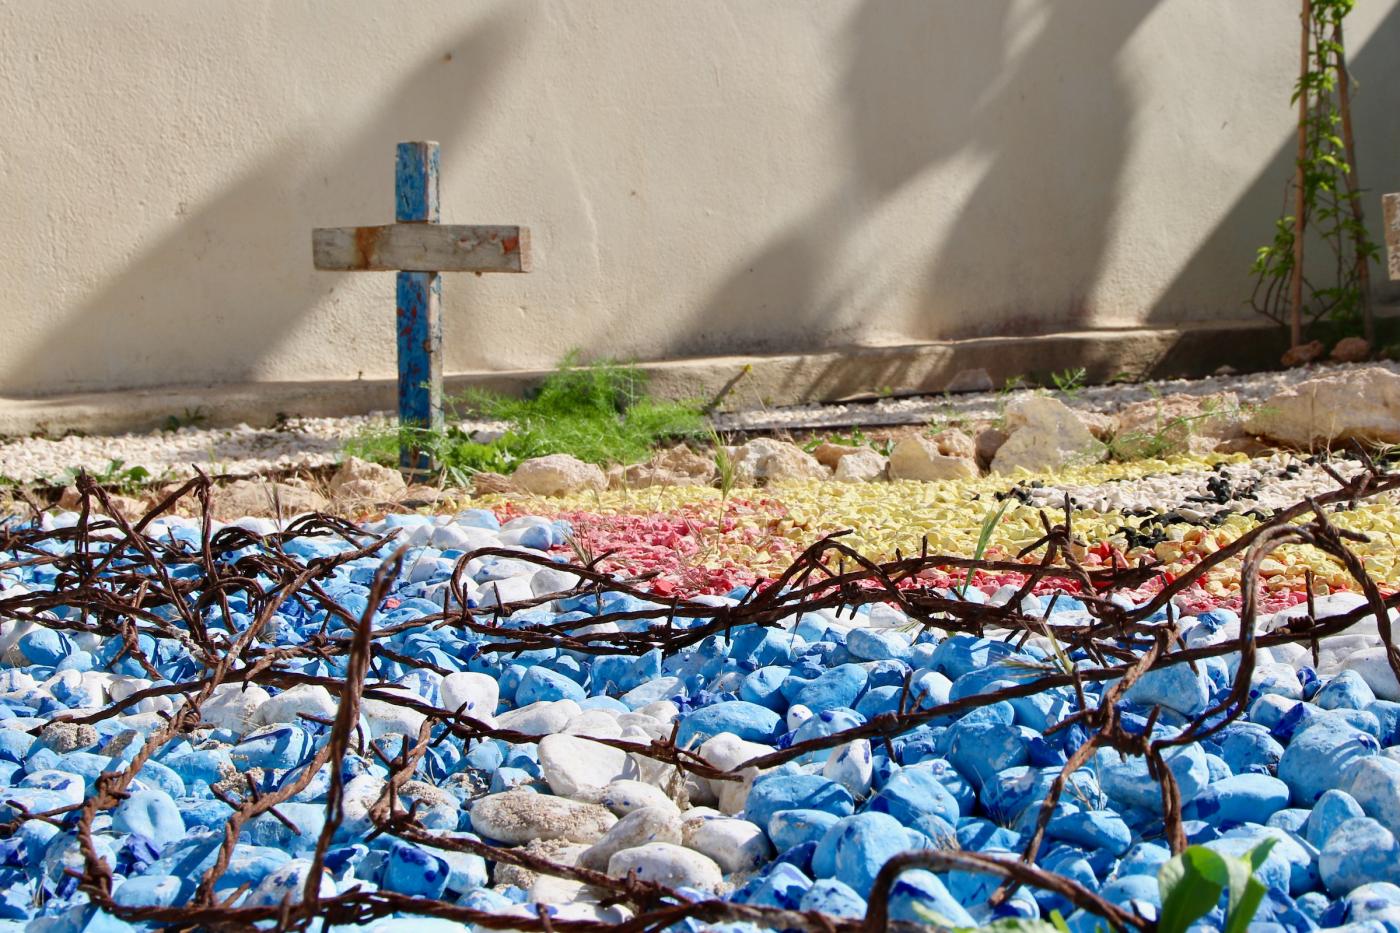 The old cemetery of Lampesusa holds a space to honor the memory of the ones who lost their lives trying to reach Europe through the sea. Crosses made with pieces from the boats carrying refugees mark the graveyard of dozen unidentified bodies. Photo: Marcelo Schneider/WCC